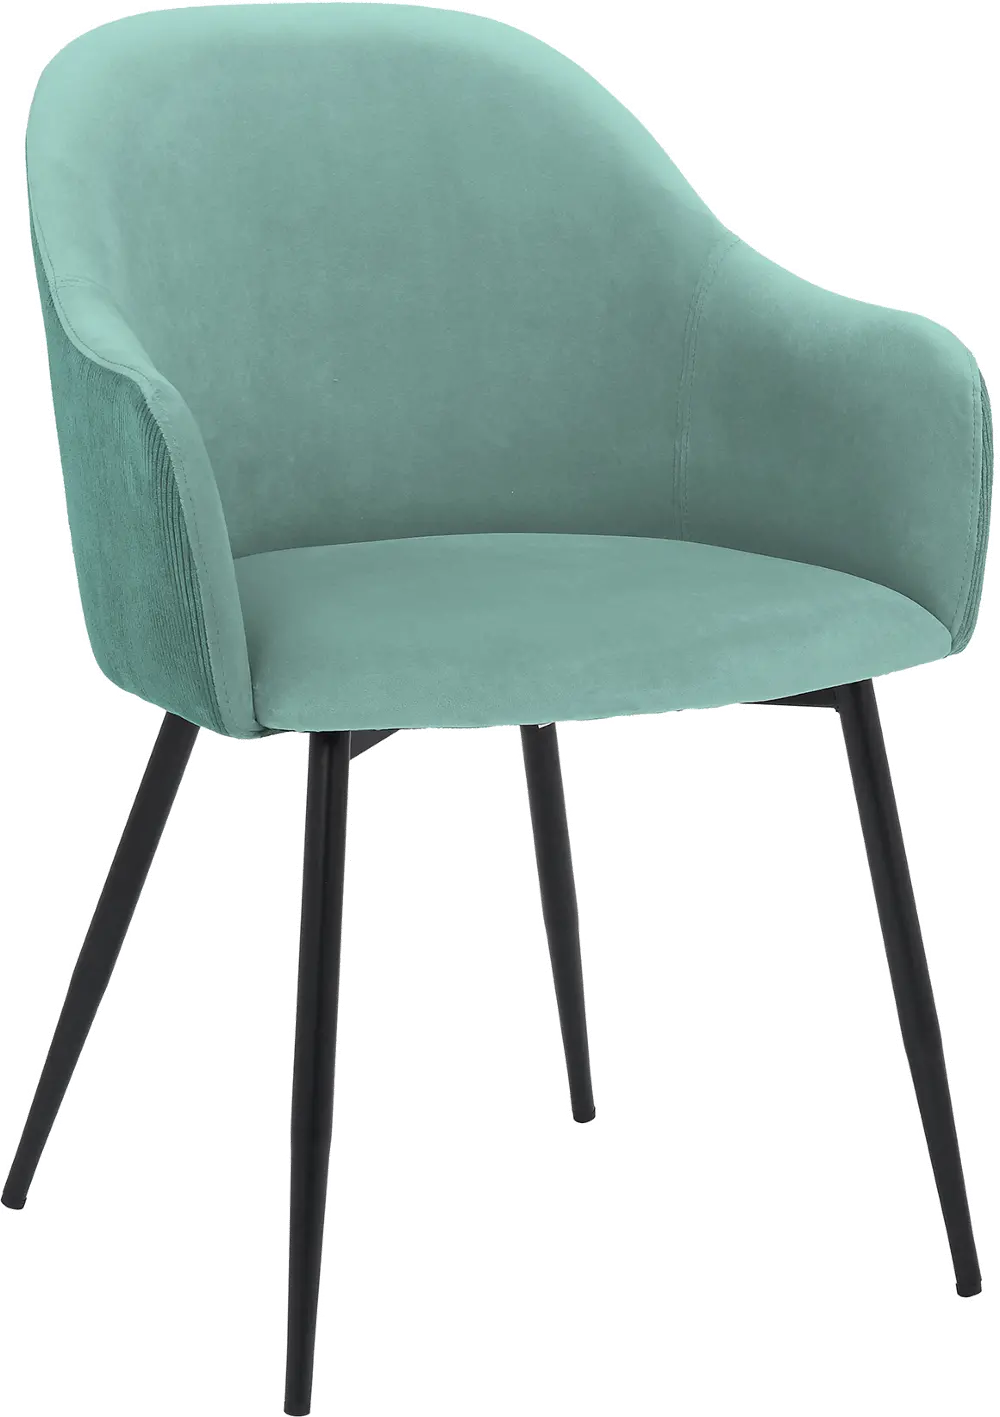 LCPXCHTL Pixie Teal Dining Room Arm Chair-1